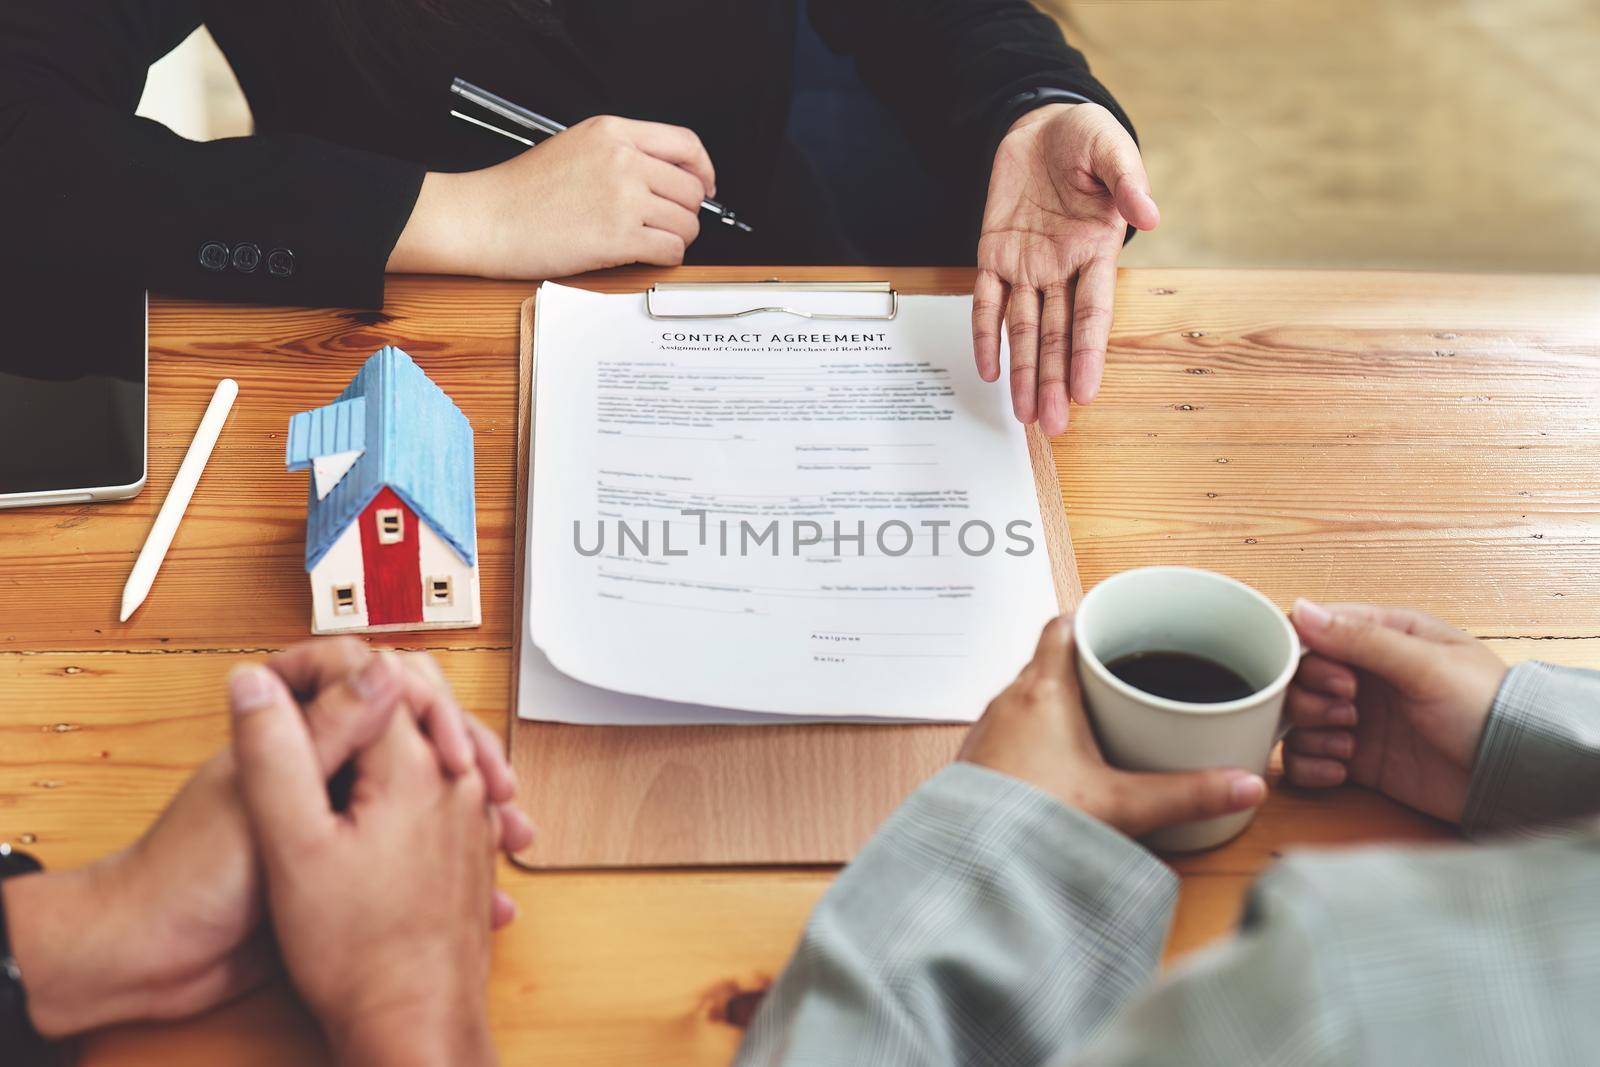 A spouse entering a home contract is reading the terms of the loan interest agreement that the bank officer or real estate agent is offering before signing.